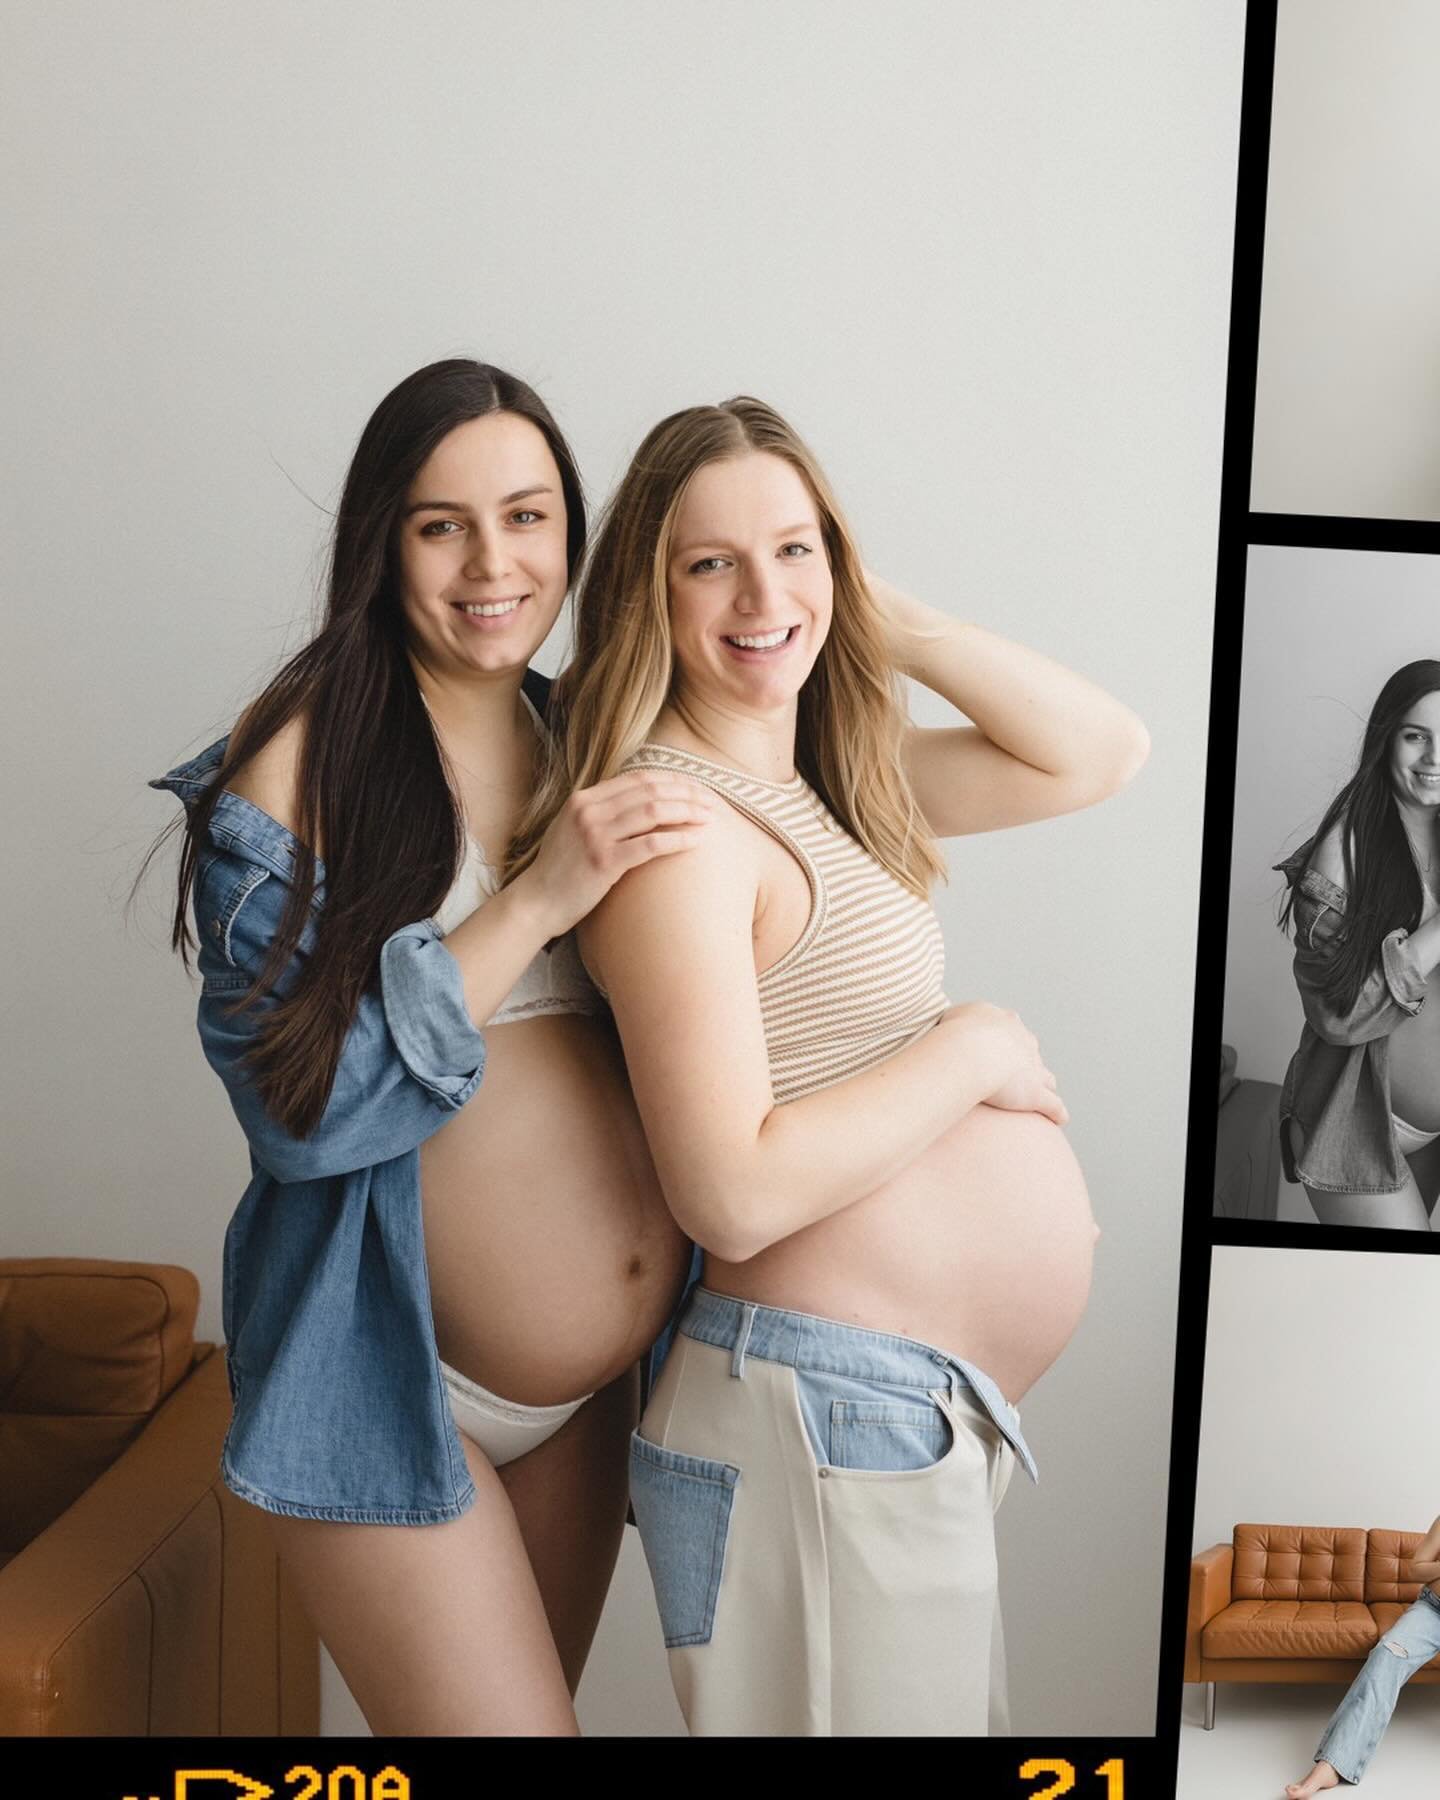 For such a long time, I had been wanting to do a double bump shoot with two besties, and when these awesome girls answered my model call, I knew they were going to be perfect for the job 👯&zwj;♀️

Both midwives, Steph and Stacey have worked together